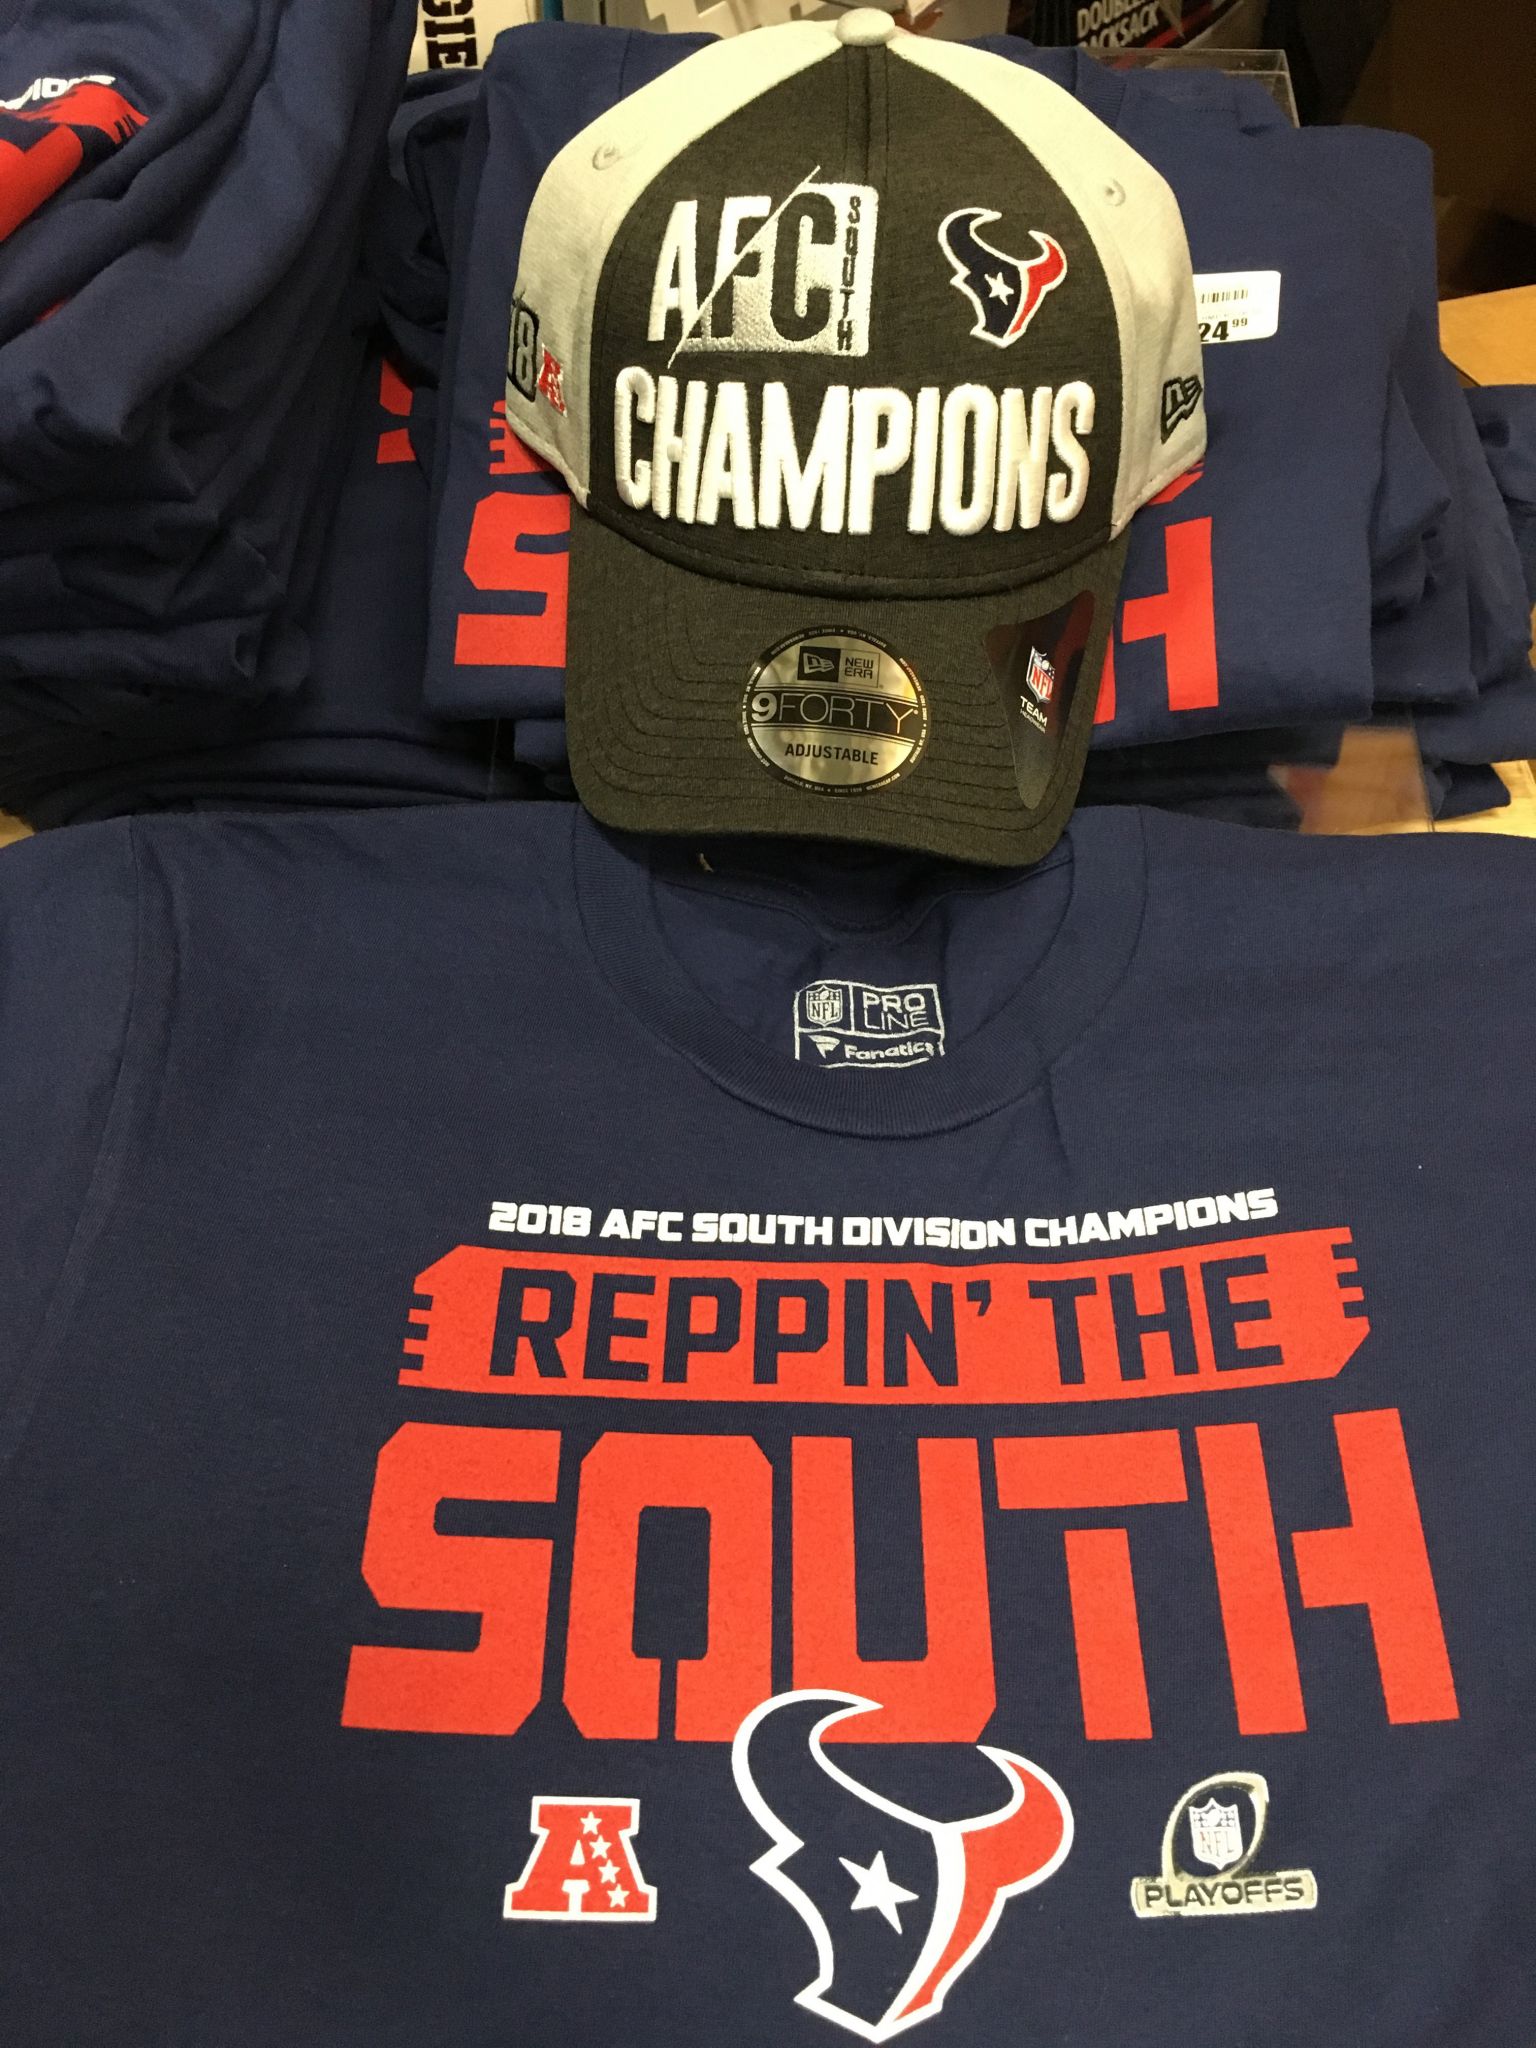 Here's what Texans' AFC South champs merchandise looks like